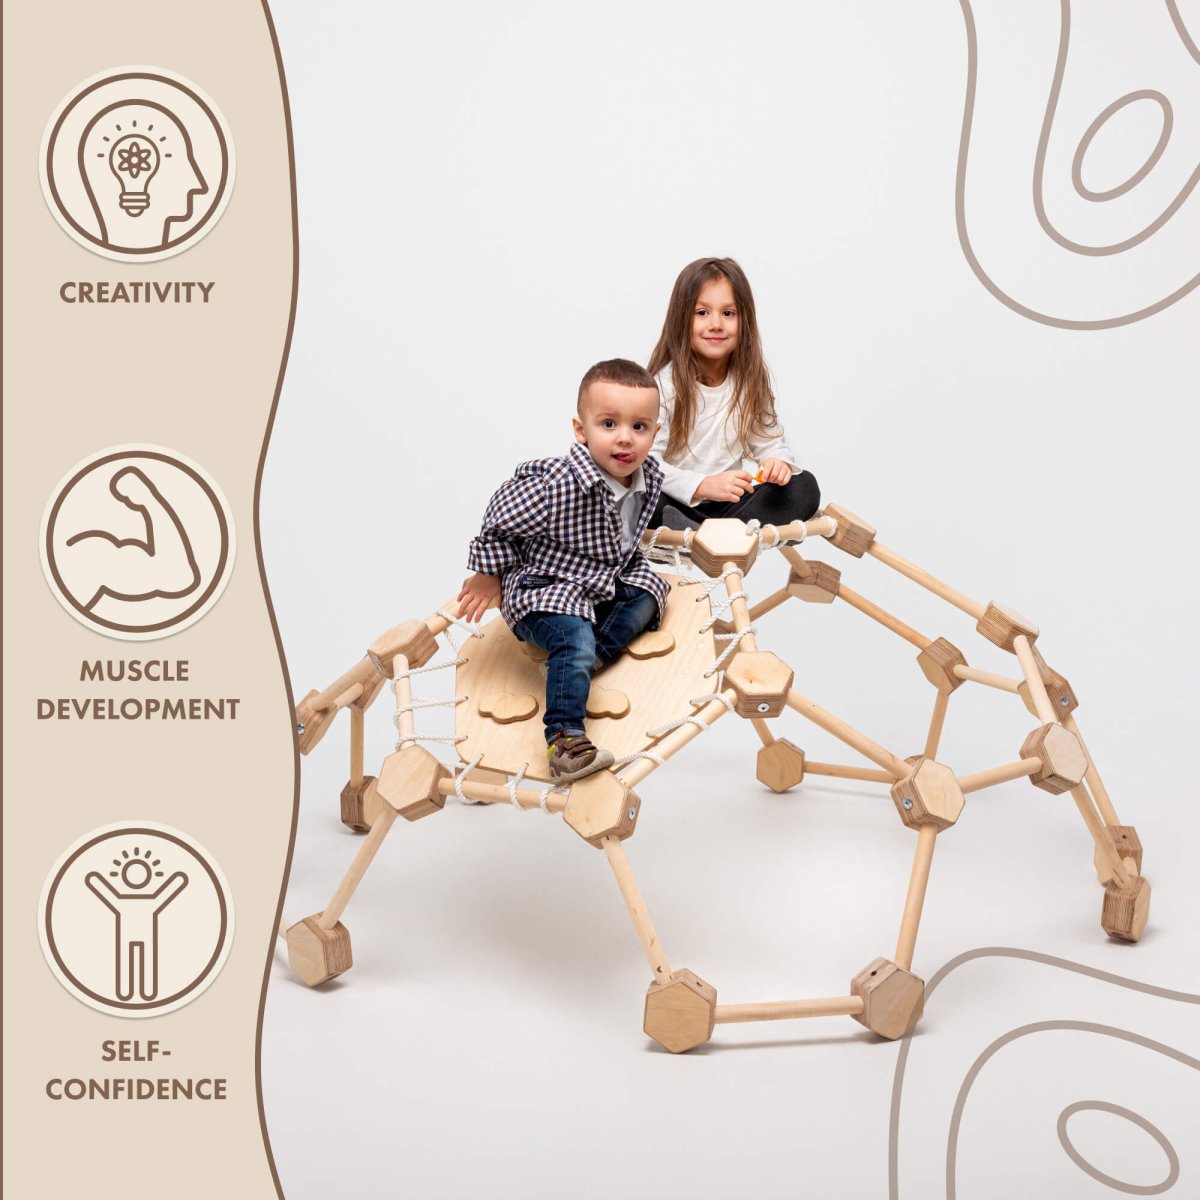 Wooden Climbing Frame Geodome / Climbing Dome for Kids 2-6 y.o. Goodevas